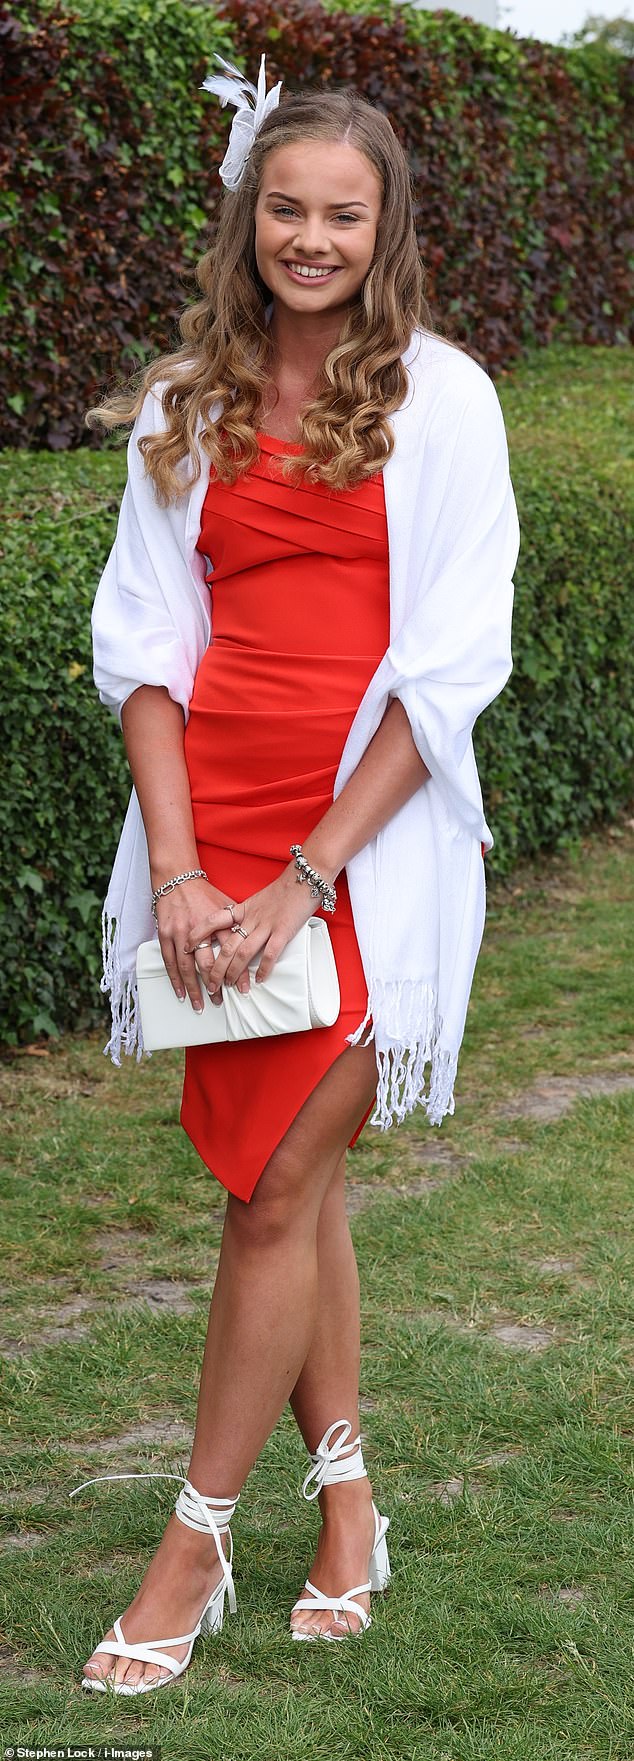 This glamorous racegoer opted for a red dress with a white shawl and white strappy sandals, with her hair in boho curls